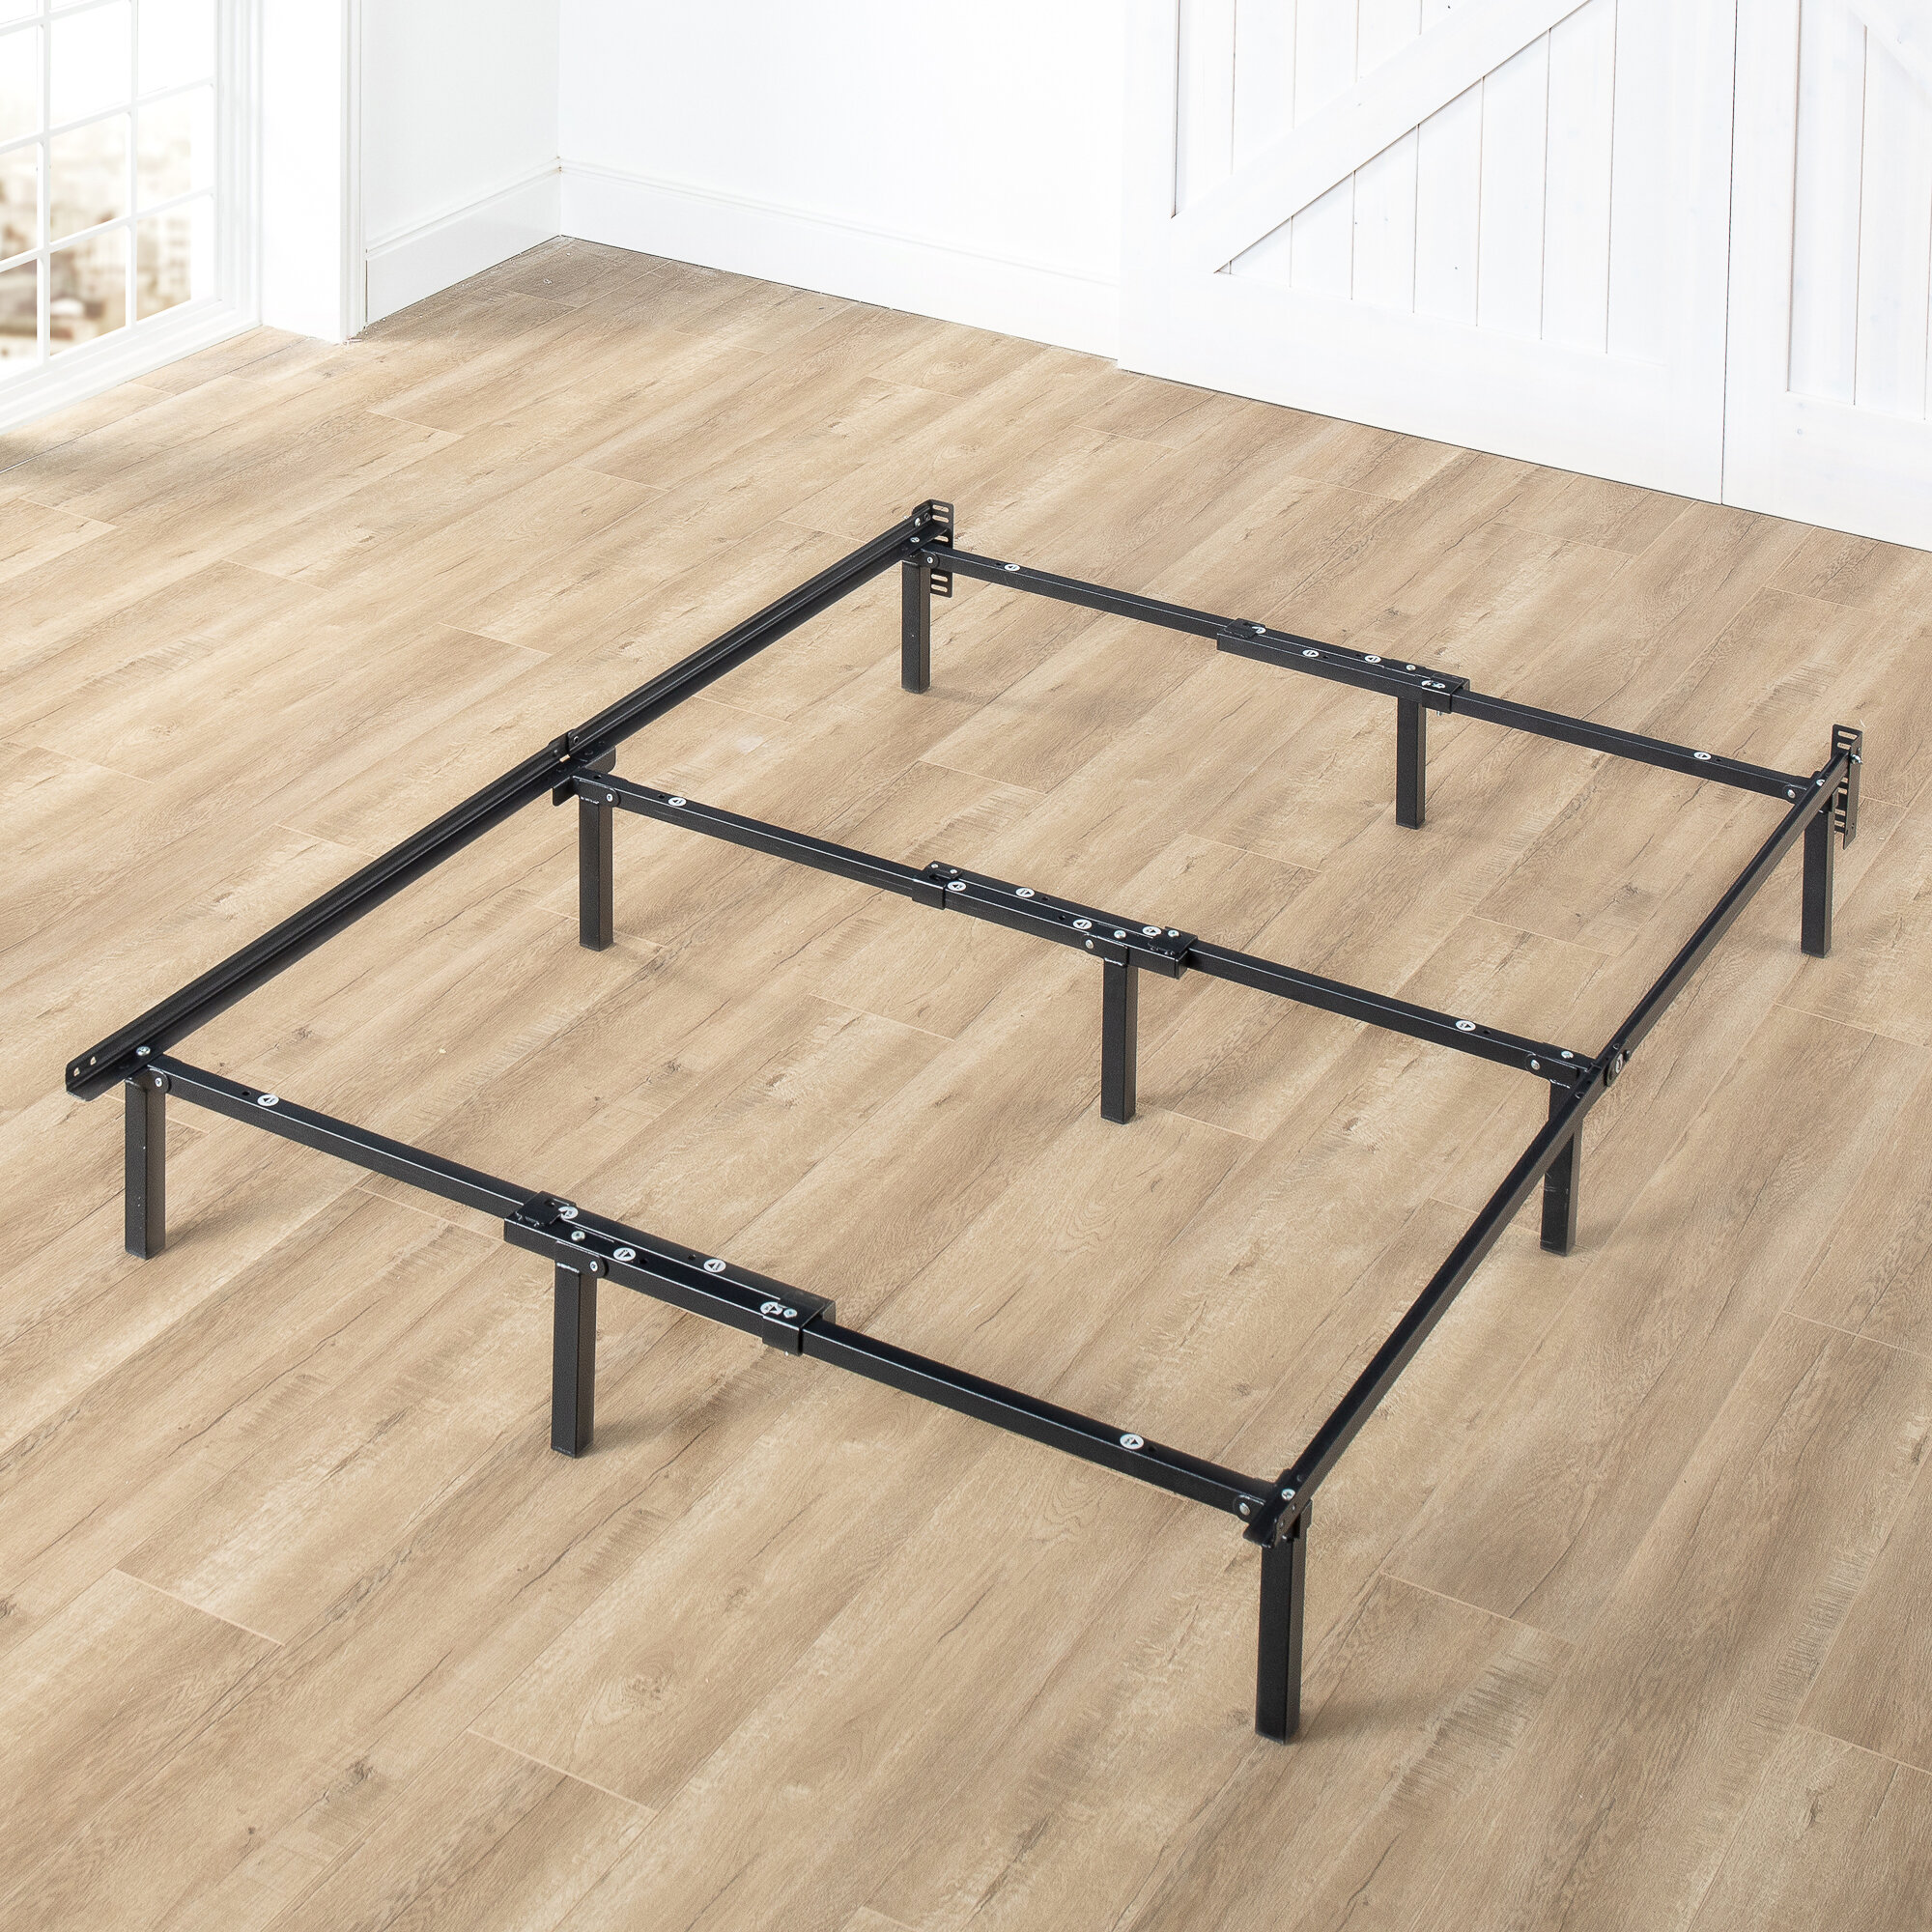 Best Full Size Metal Bed Frame 9 Leg Support Compack For Box Spring Mattress New 